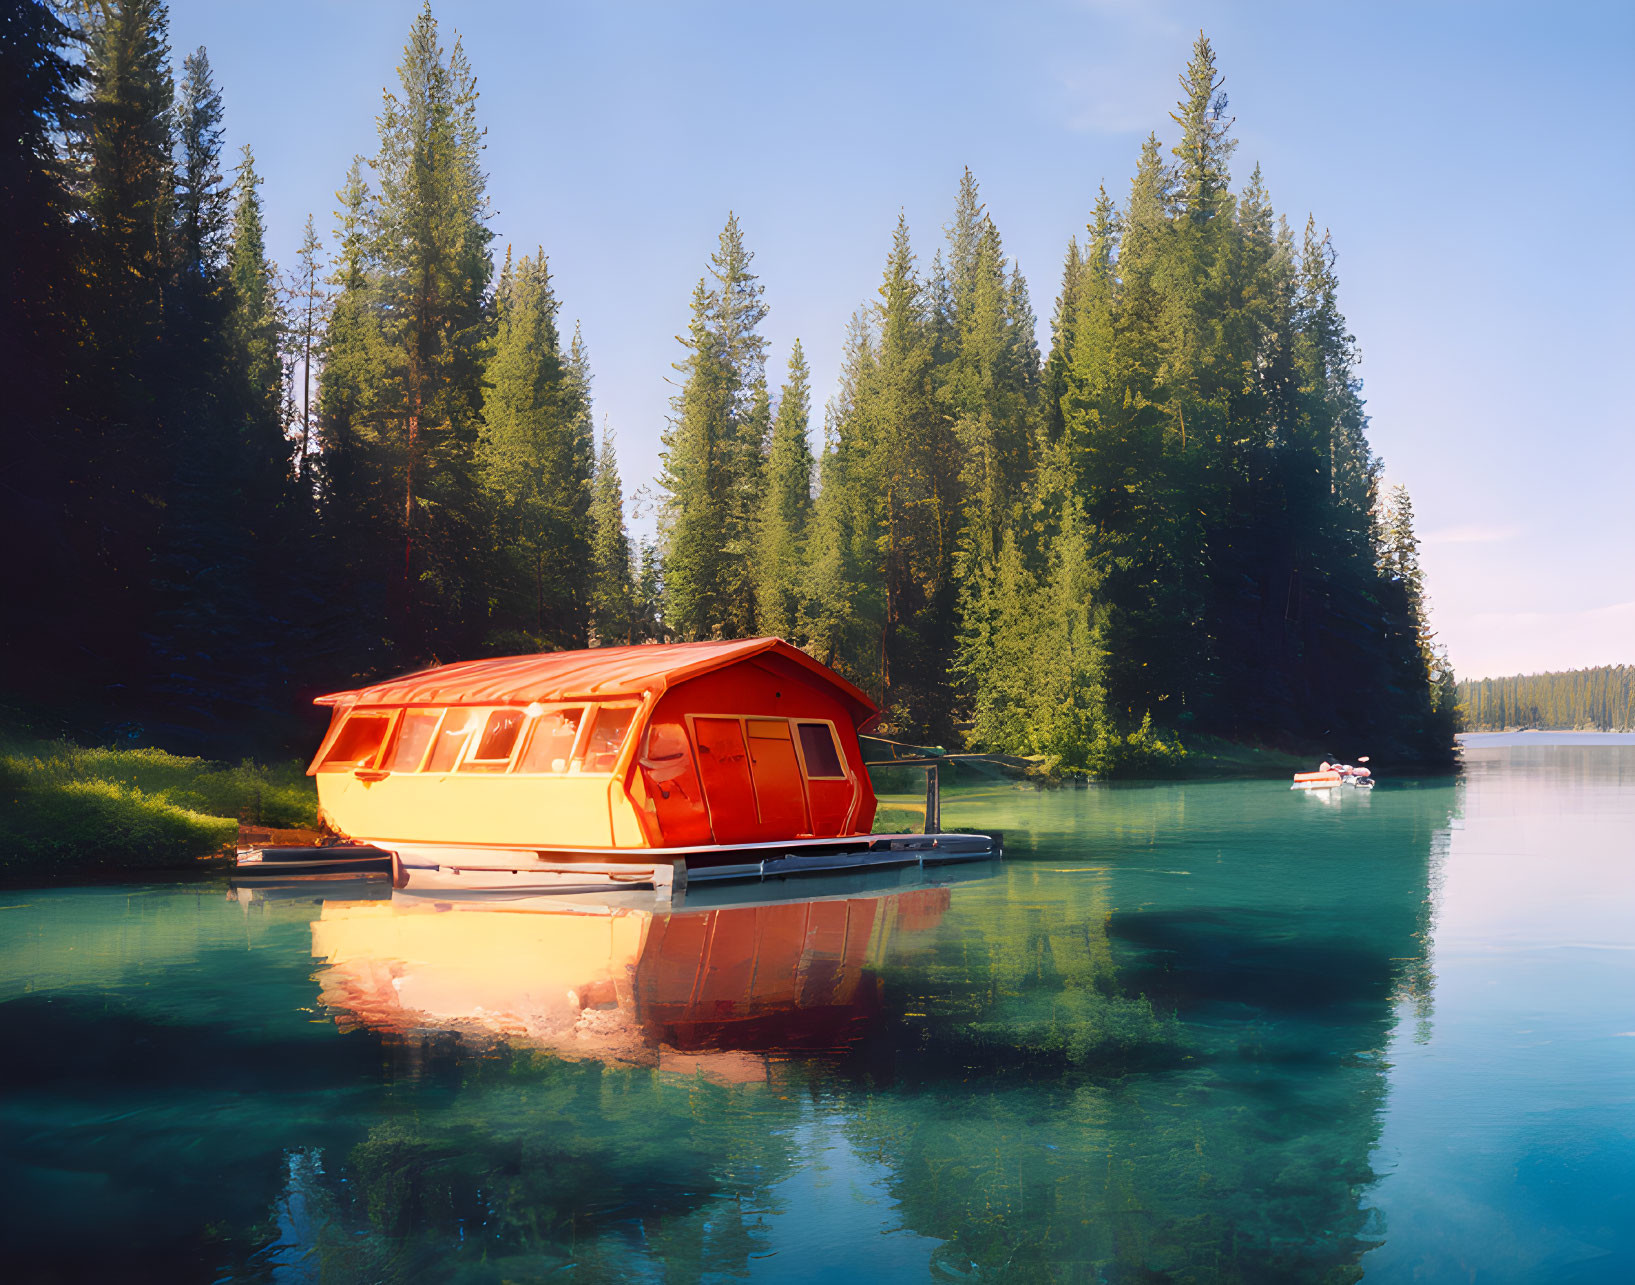 Tranquil lake scene with red-roofed houseboat near lush pine forest